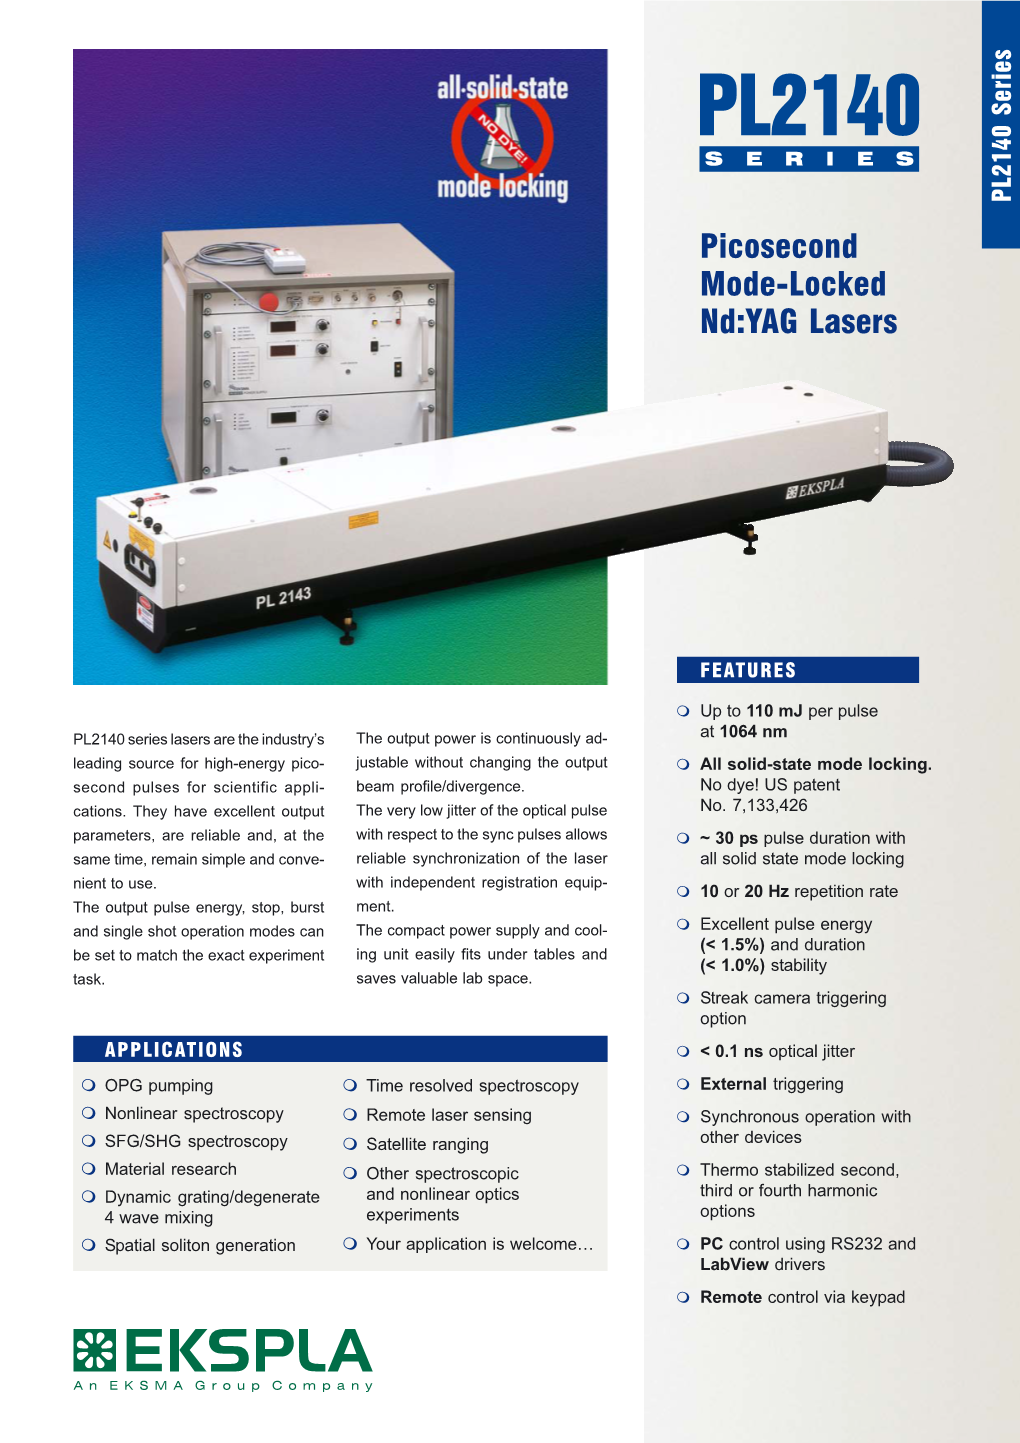 PL2140 SERIES PL2140 Series Picosecond Mode-Locked Nd:YAG Lasers